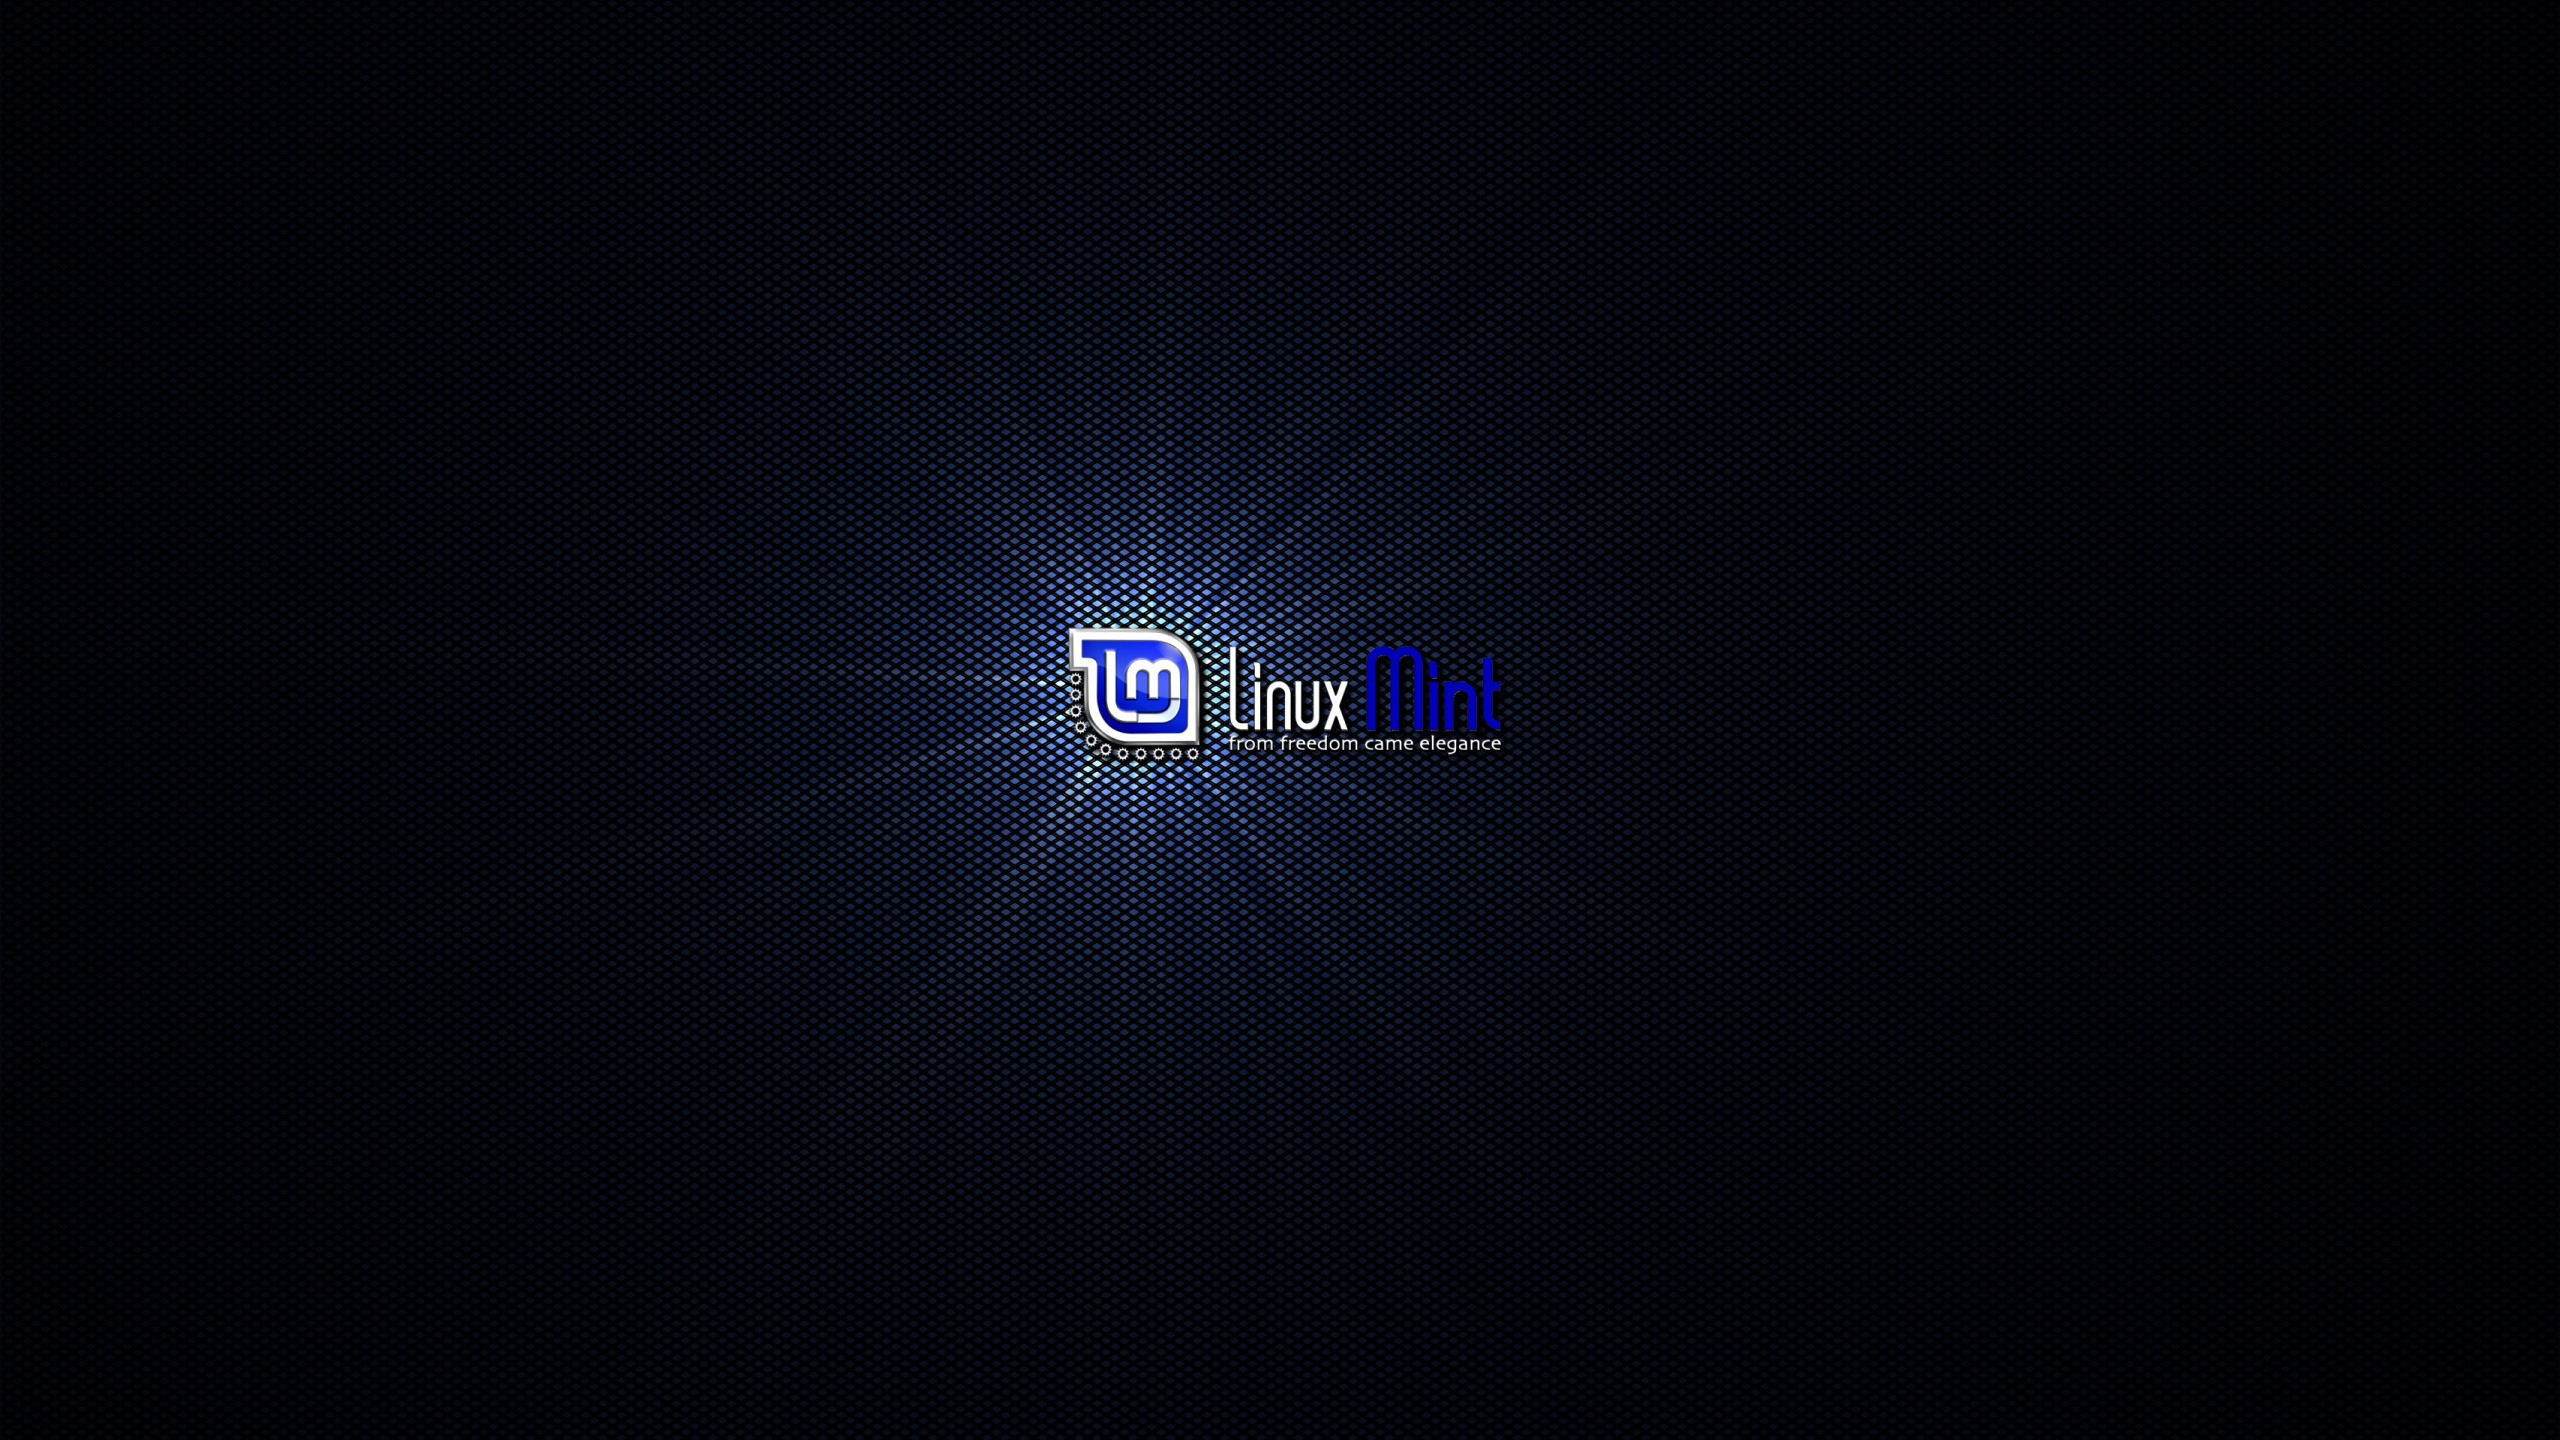 Blue mint Linux for 2560x1440 HDTV resolution